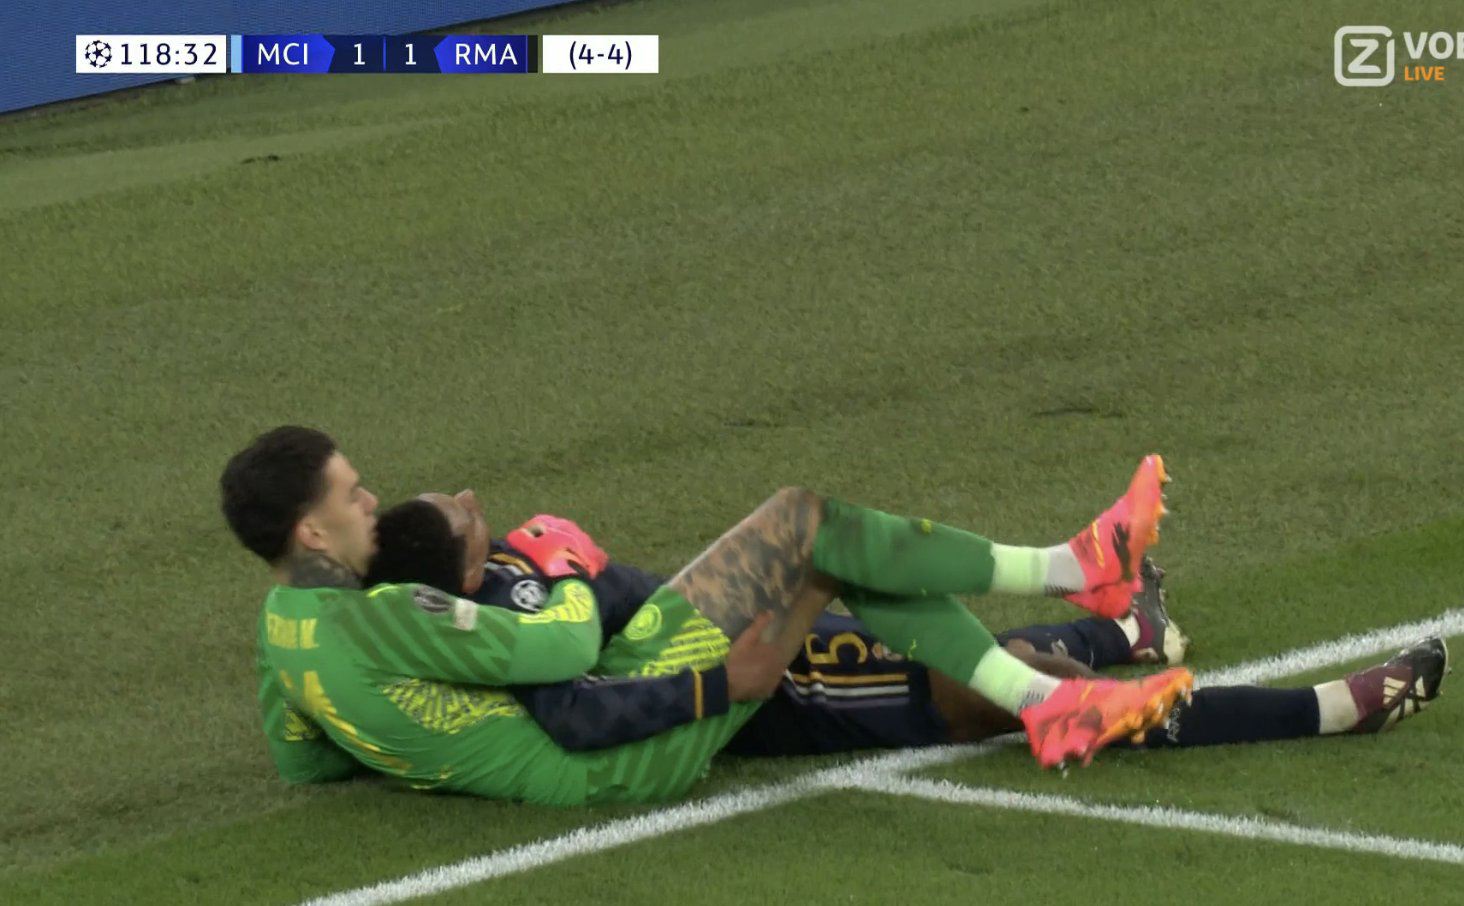 PHOTO Jude Bellingham resting on Ederson body together like lovers